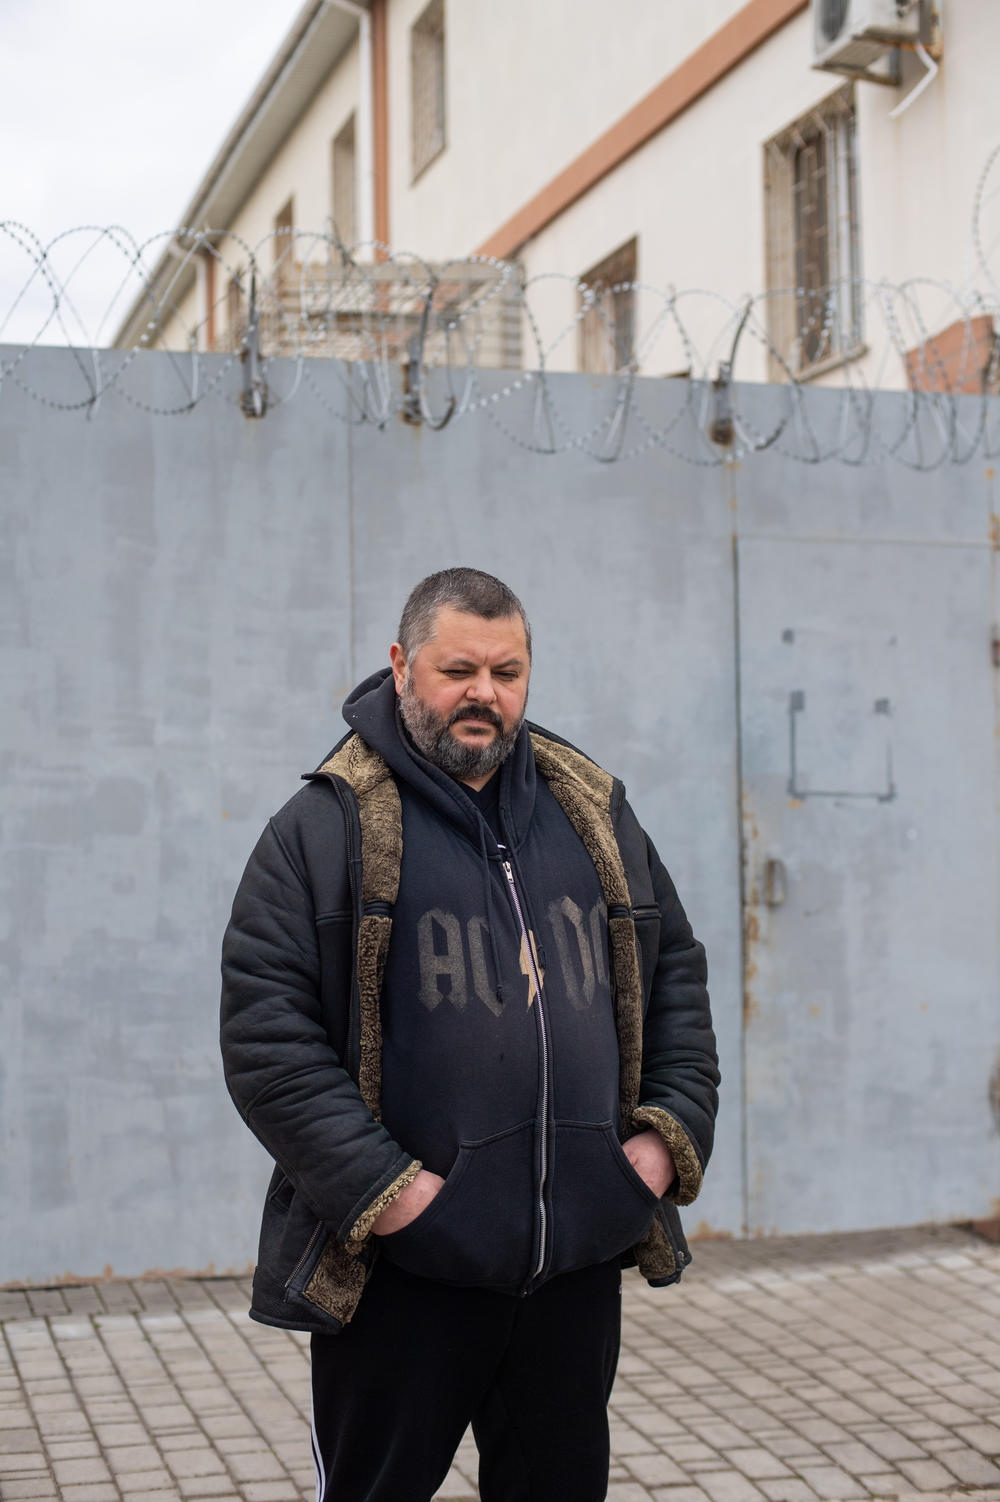 Oleksandr Diakov, a Kherson resident, poses outside the facility where he was detained and tortured by Russian forces during the occupation of the city.